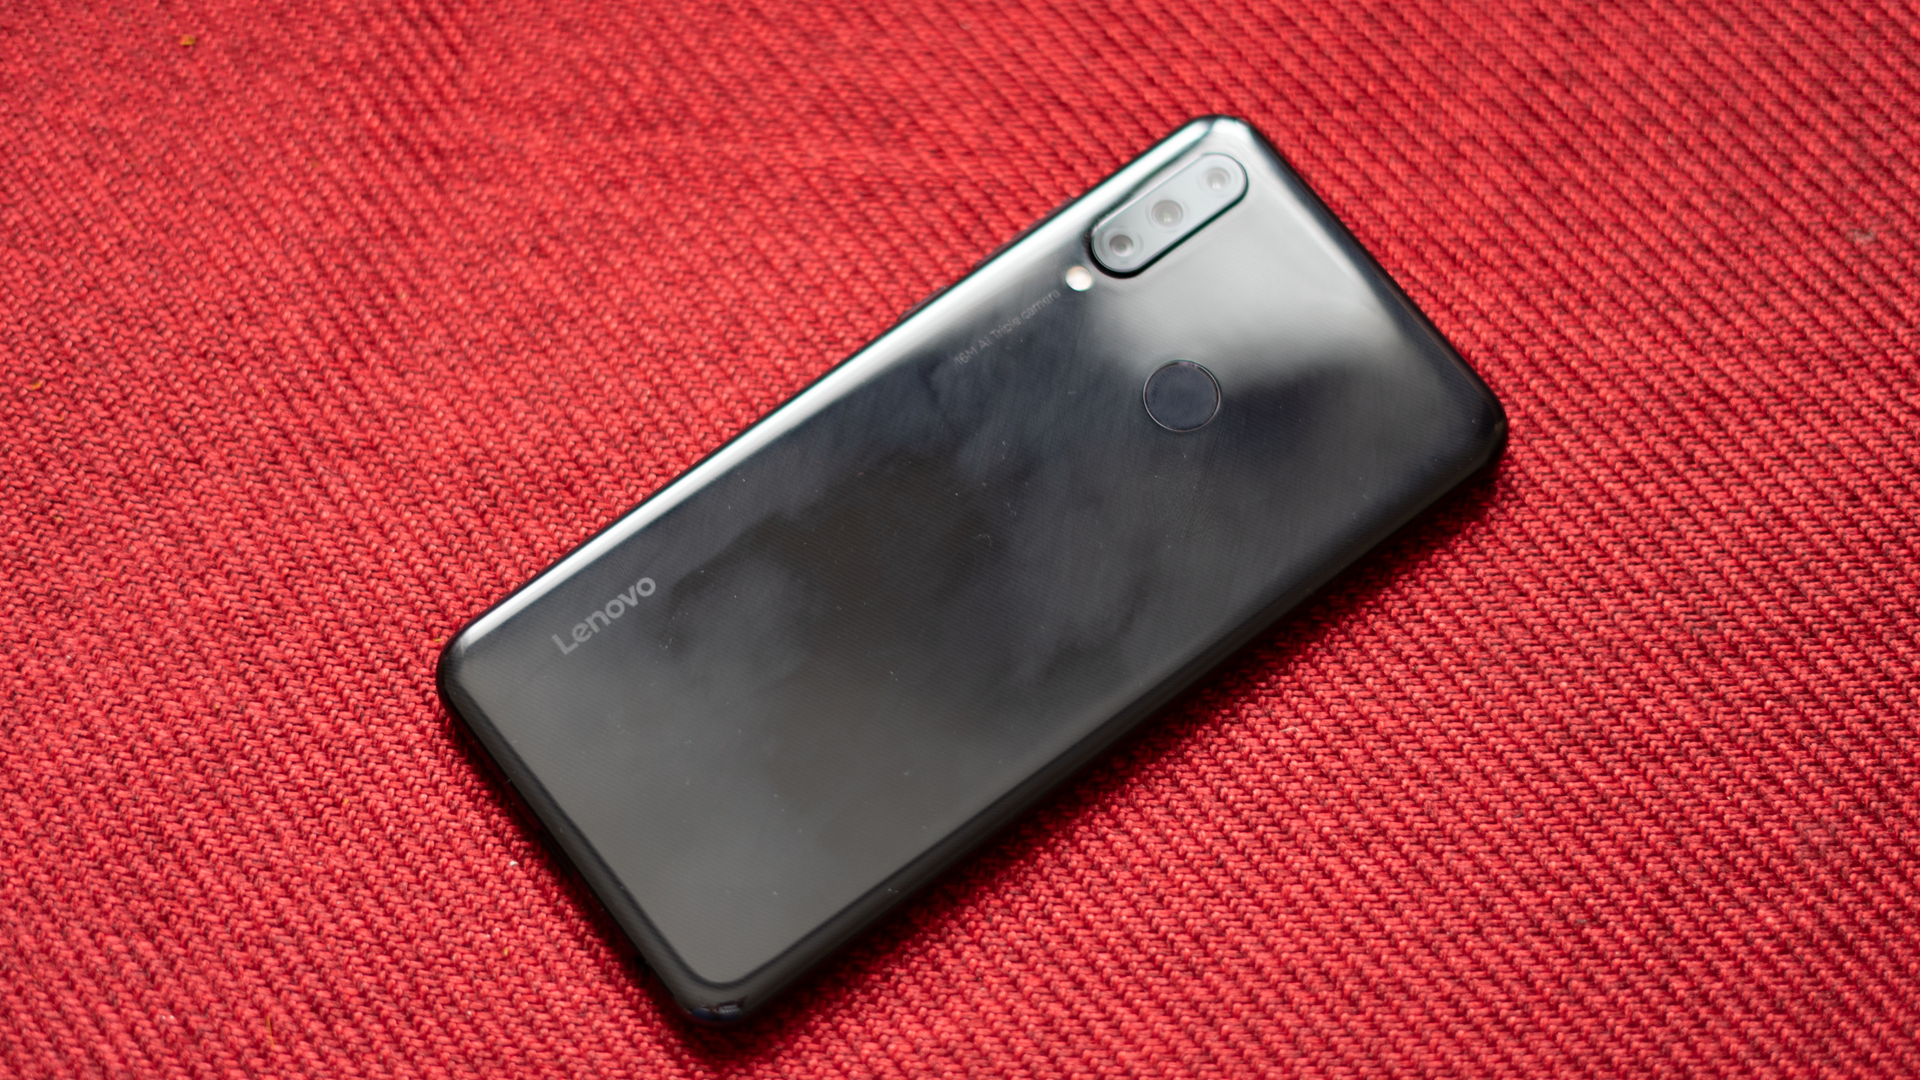 Lenovo K10 Note back of the phone with camera module and fingerprint reader